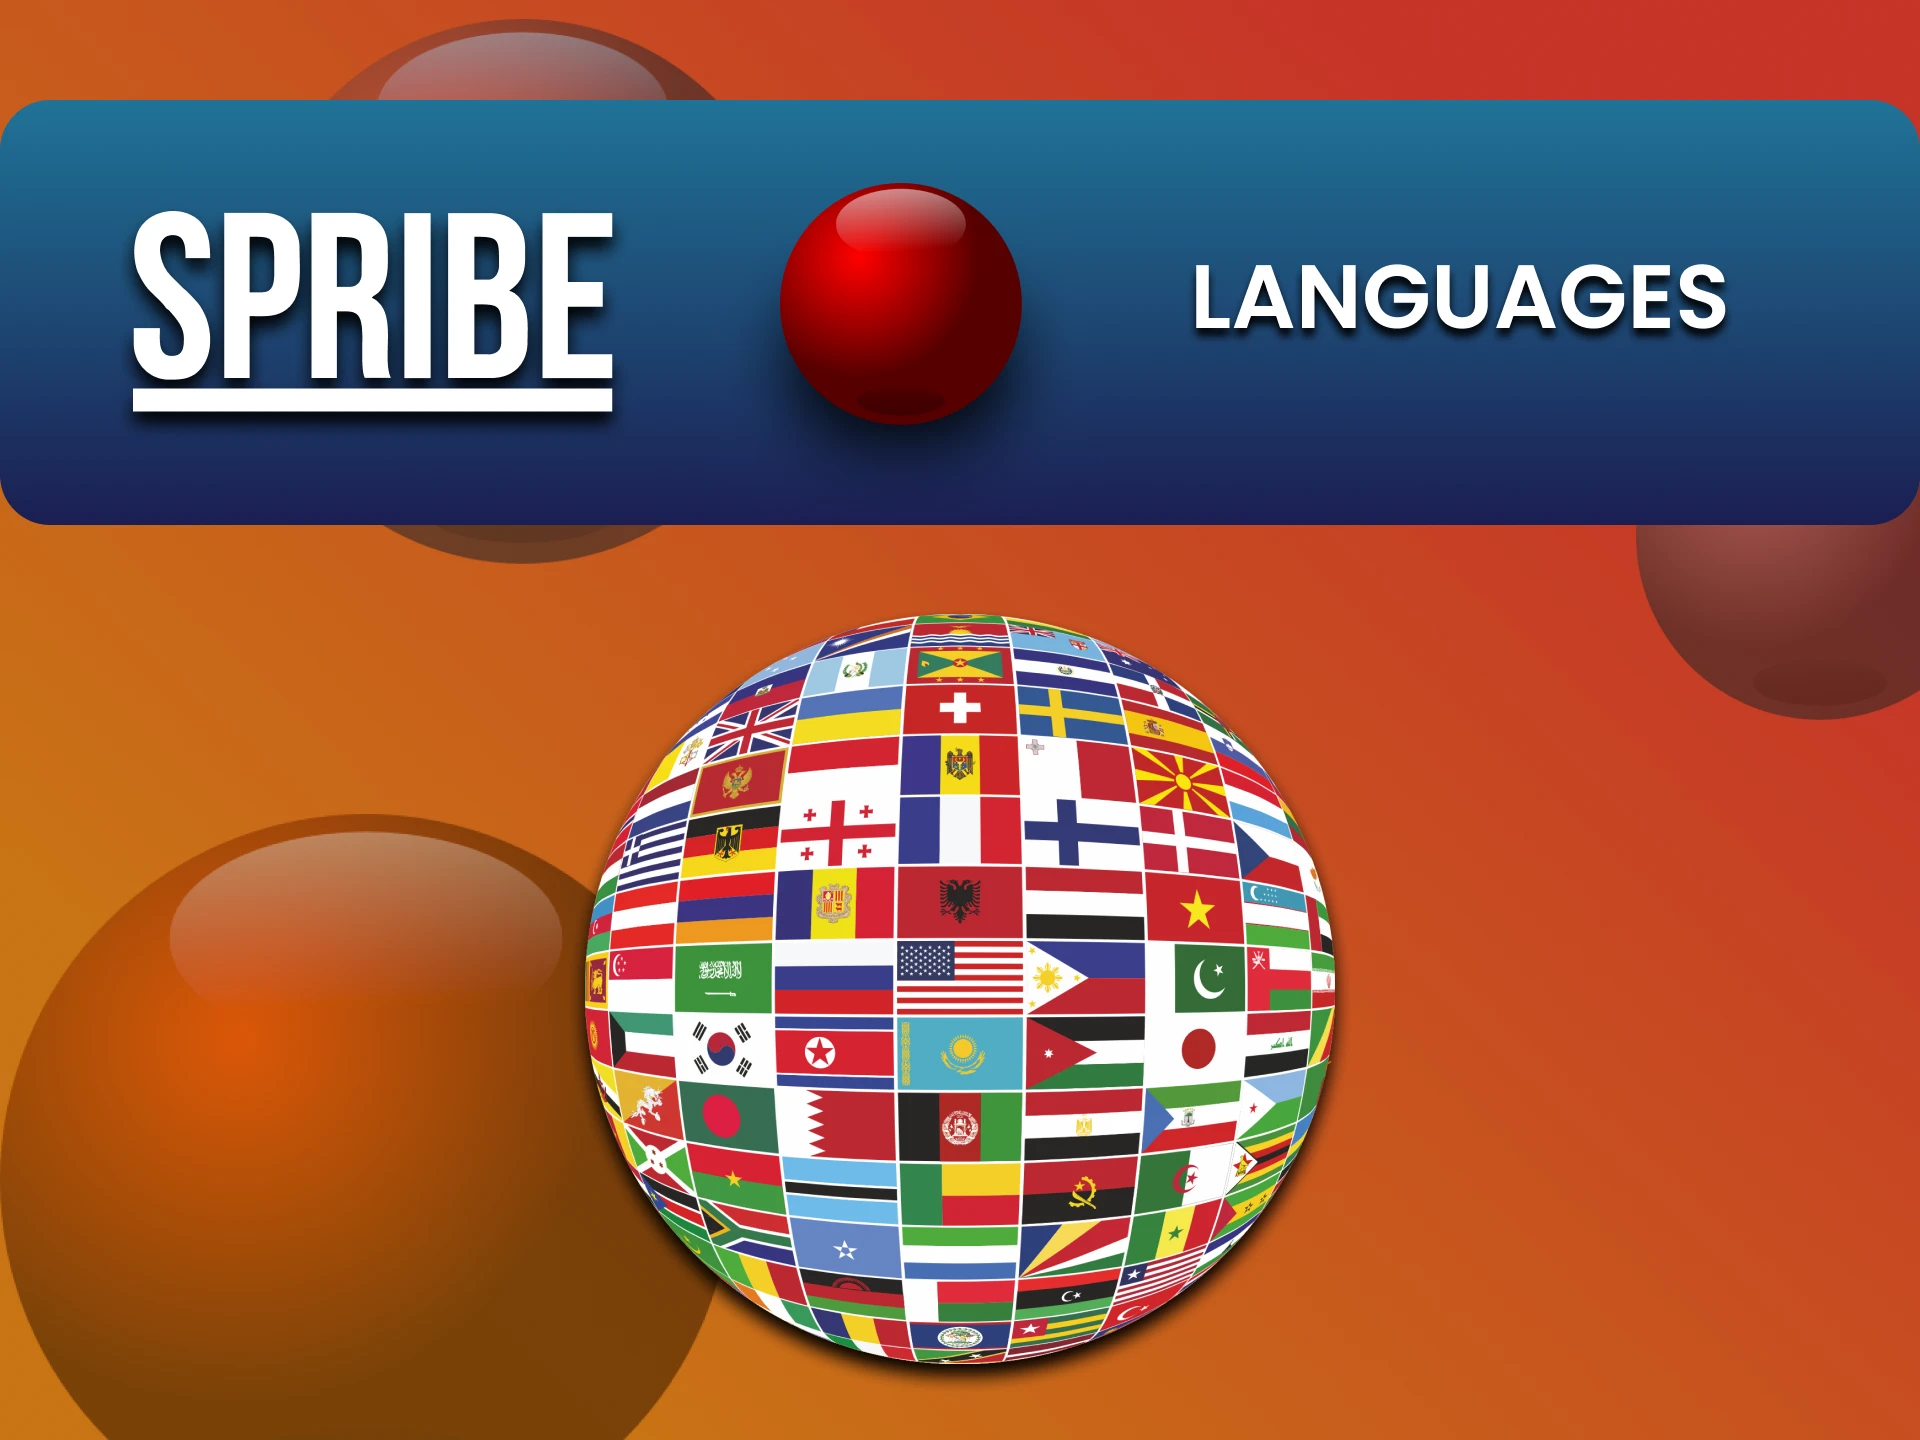 Find out in which languages ​​you can use Spribe games.